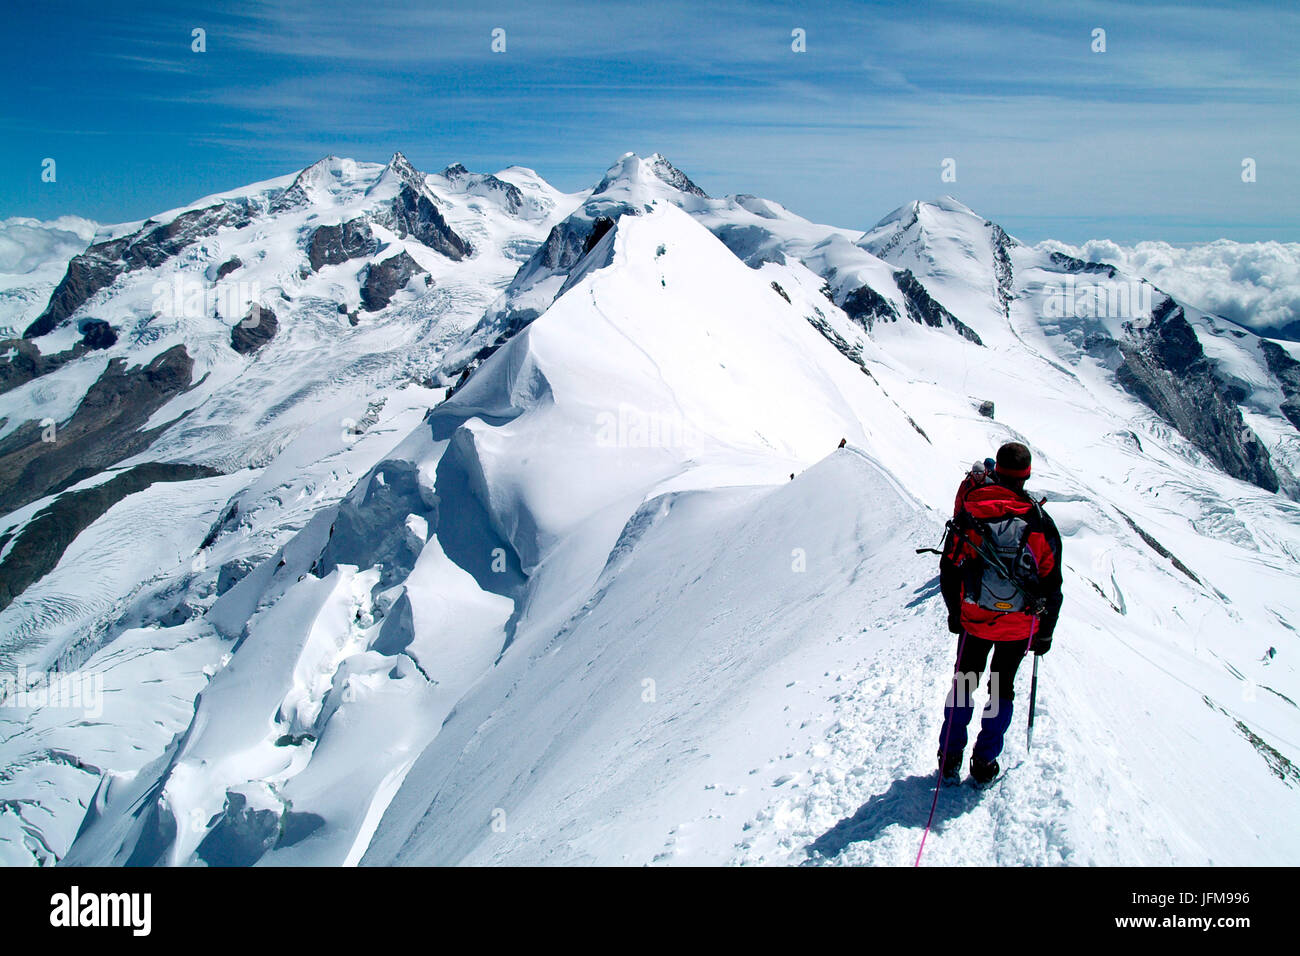 A hiker contemplating the breathtaking view from the Breithorn summit, in the Mount rosa Massif, with the Lyskamm, Castor, Pollux, on the border between Italy and Switzerland Europe Stock Photo